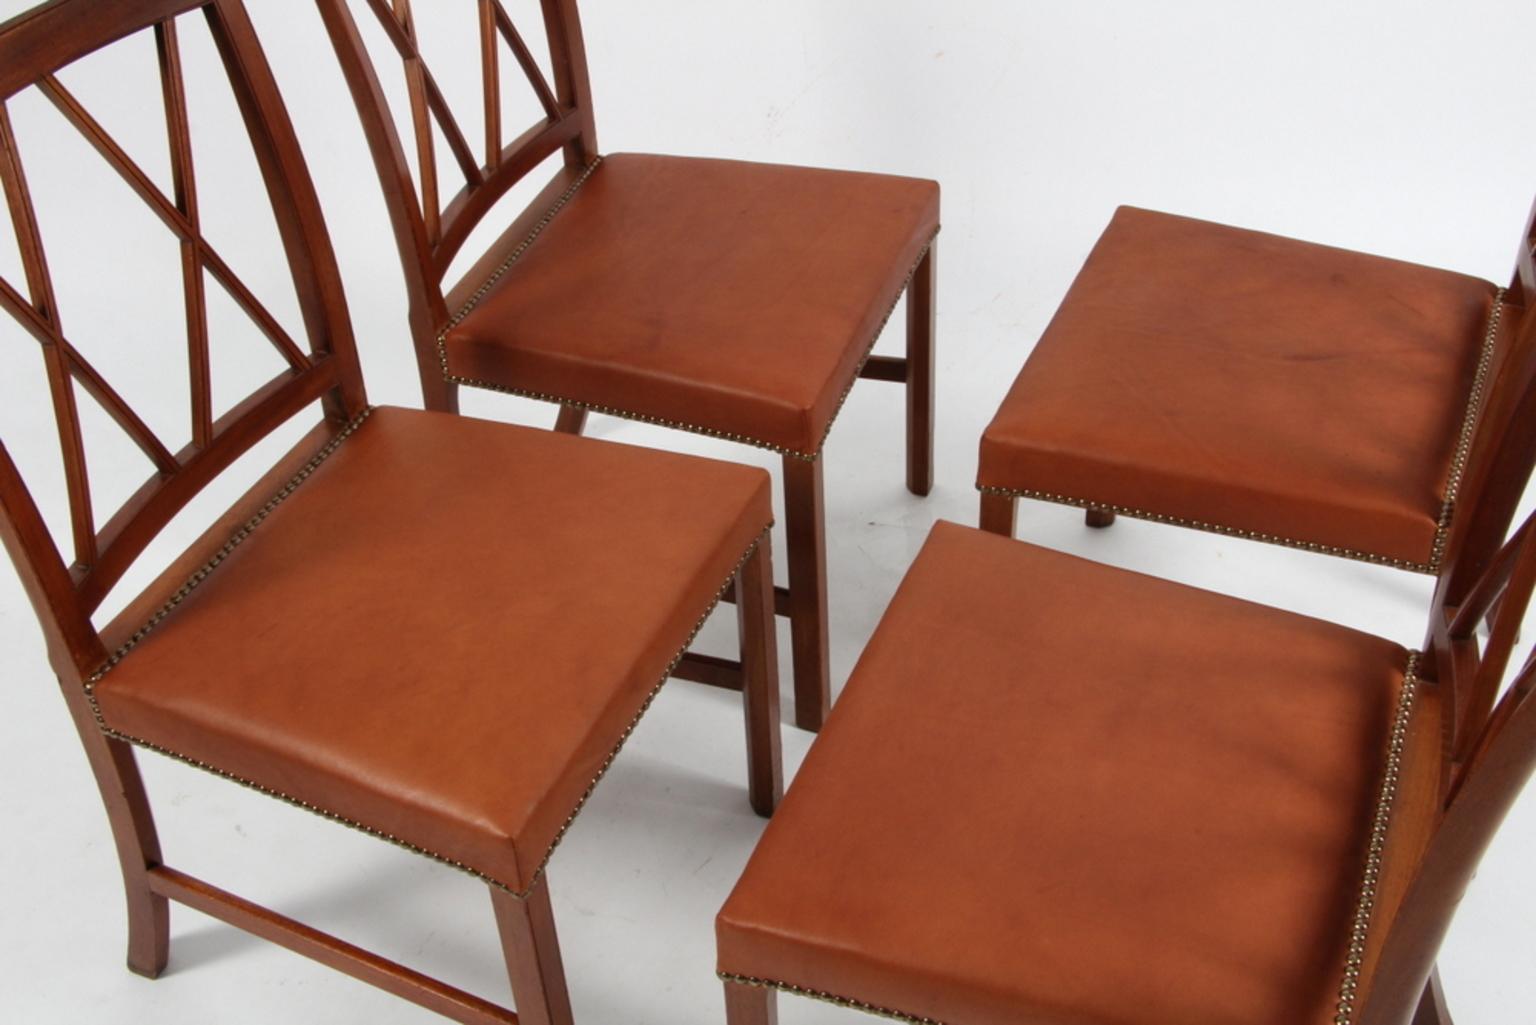 Ole Wanscher set of four dining chairs, new upholstered cognac aniline leather.

Made of mahogany.

Made of A. J. Iversen.